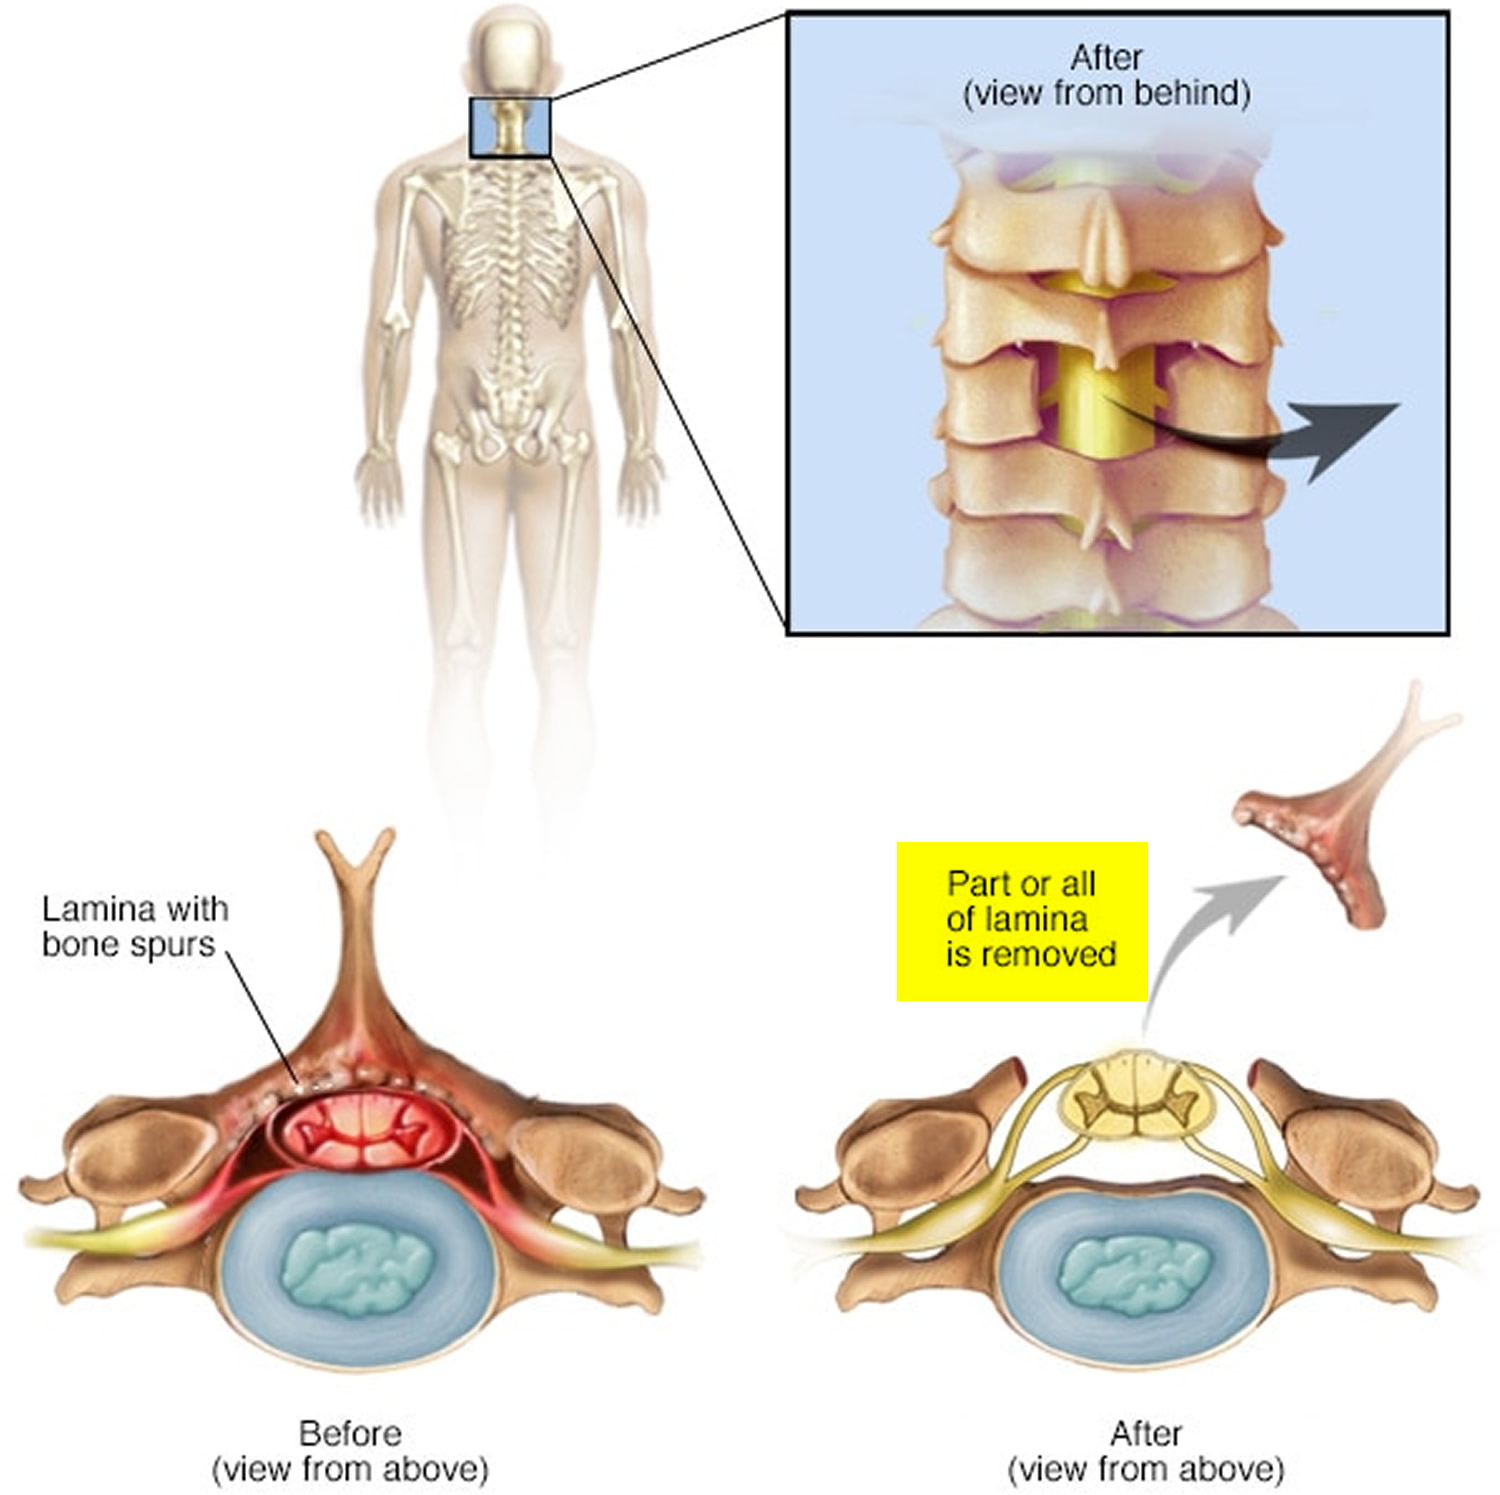 What are the long term problems after a laminectomy?